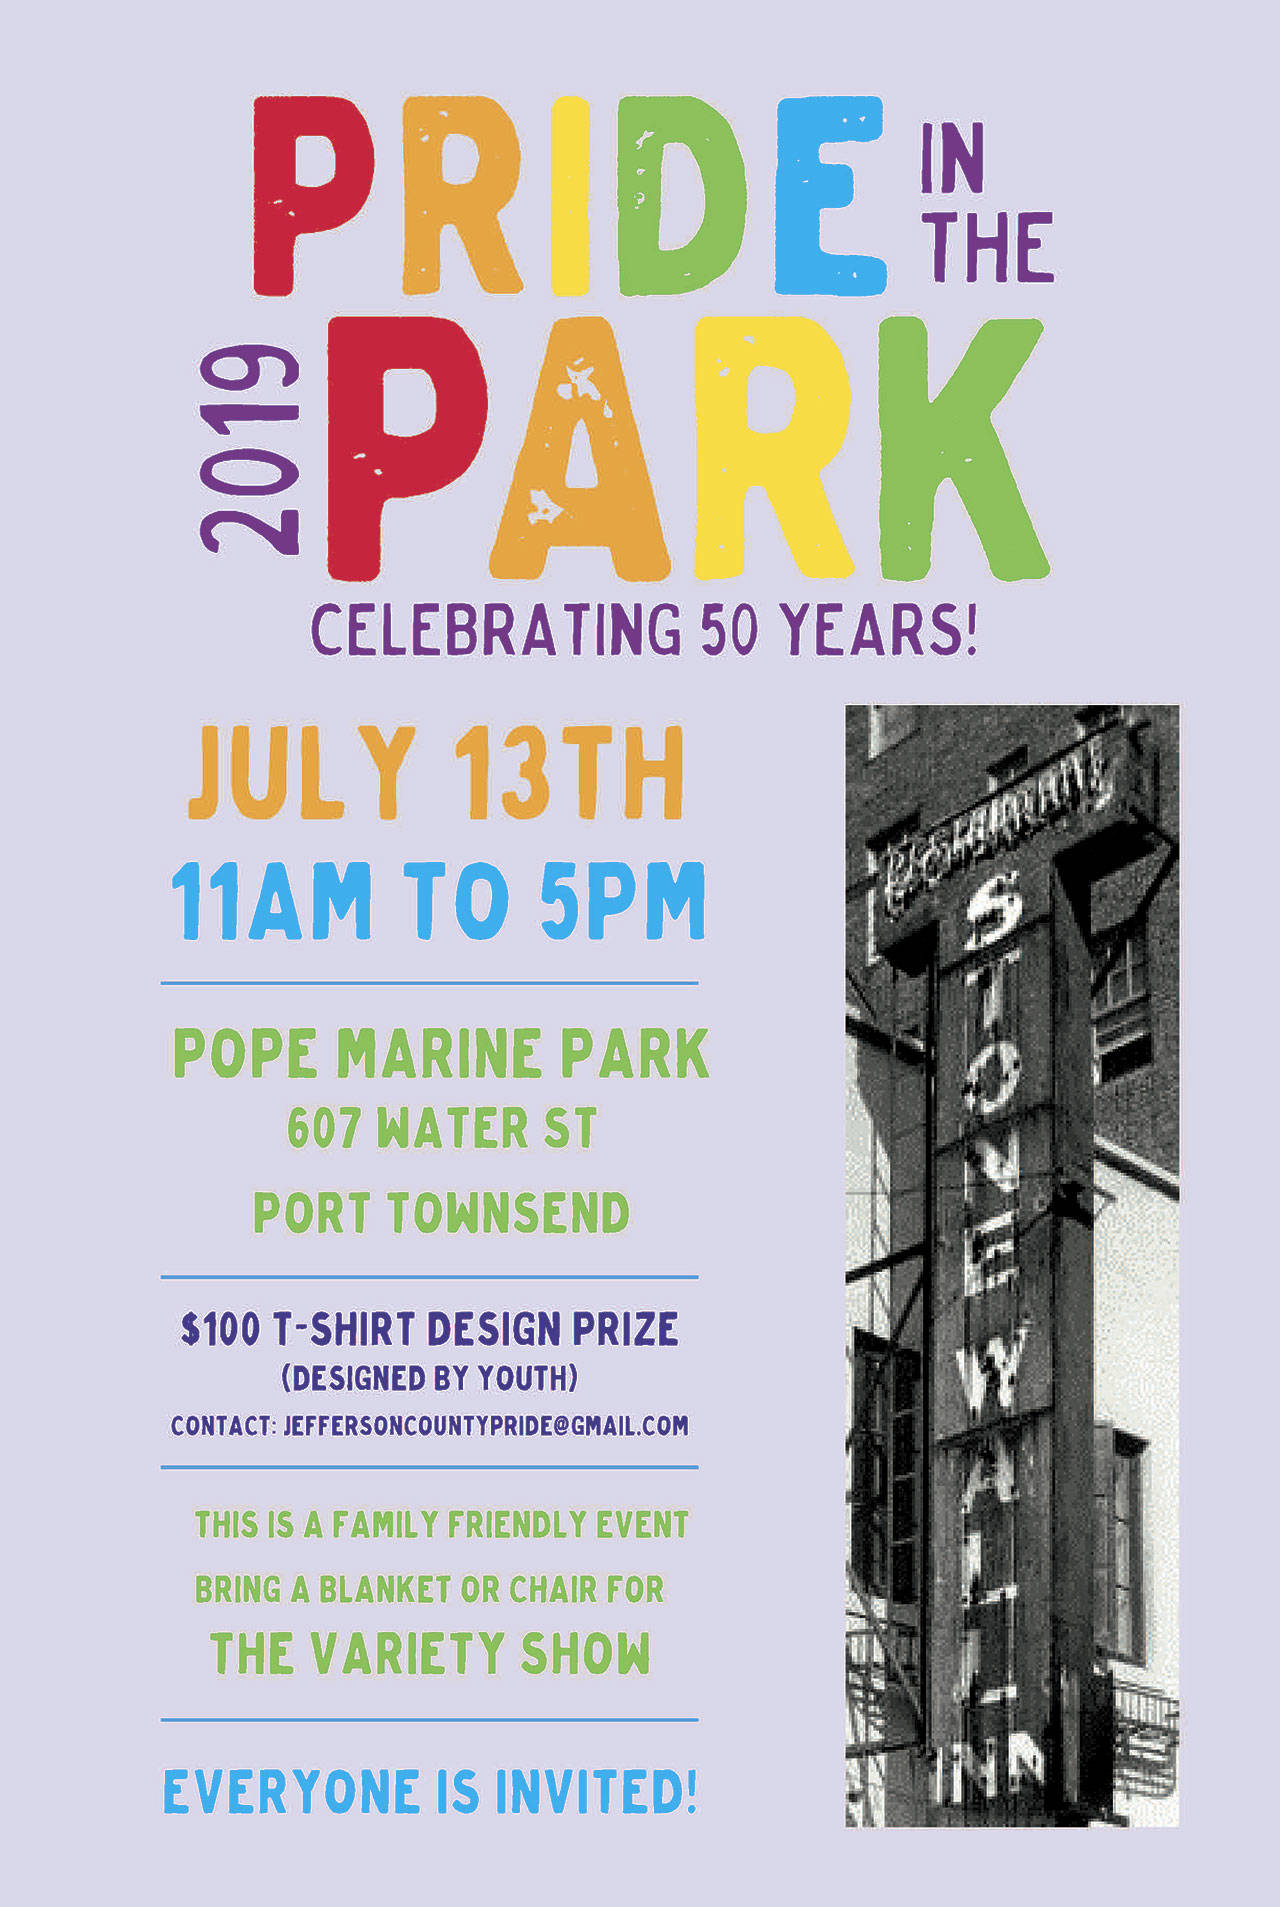 Second Annual Pride in the Park is Saturday